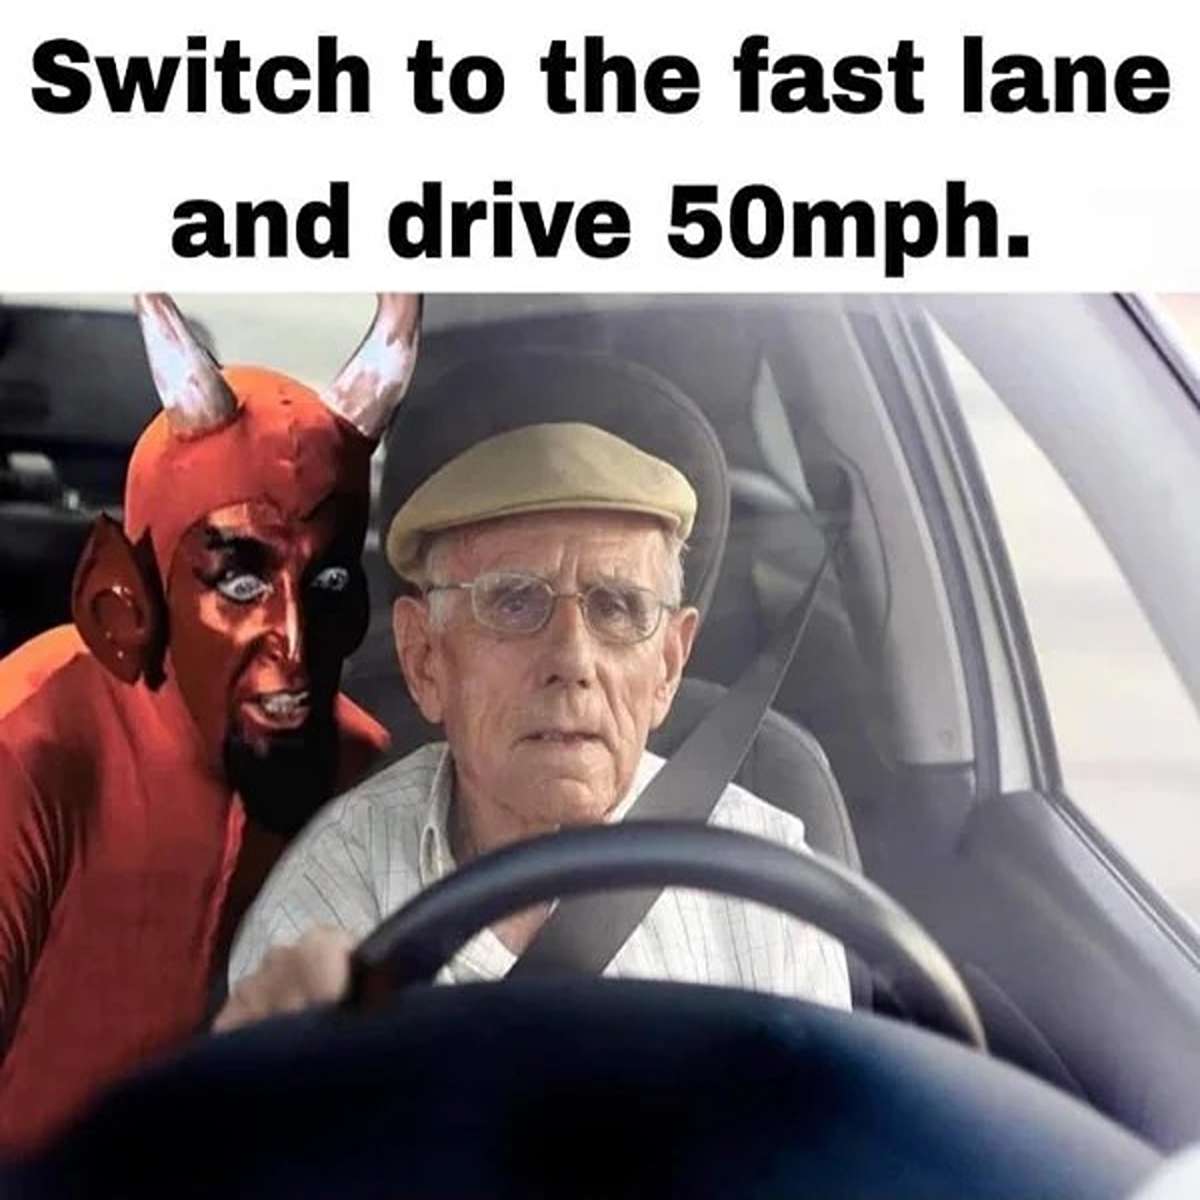 fresh memes - - - Switch to the fast lane and drive 50mph.